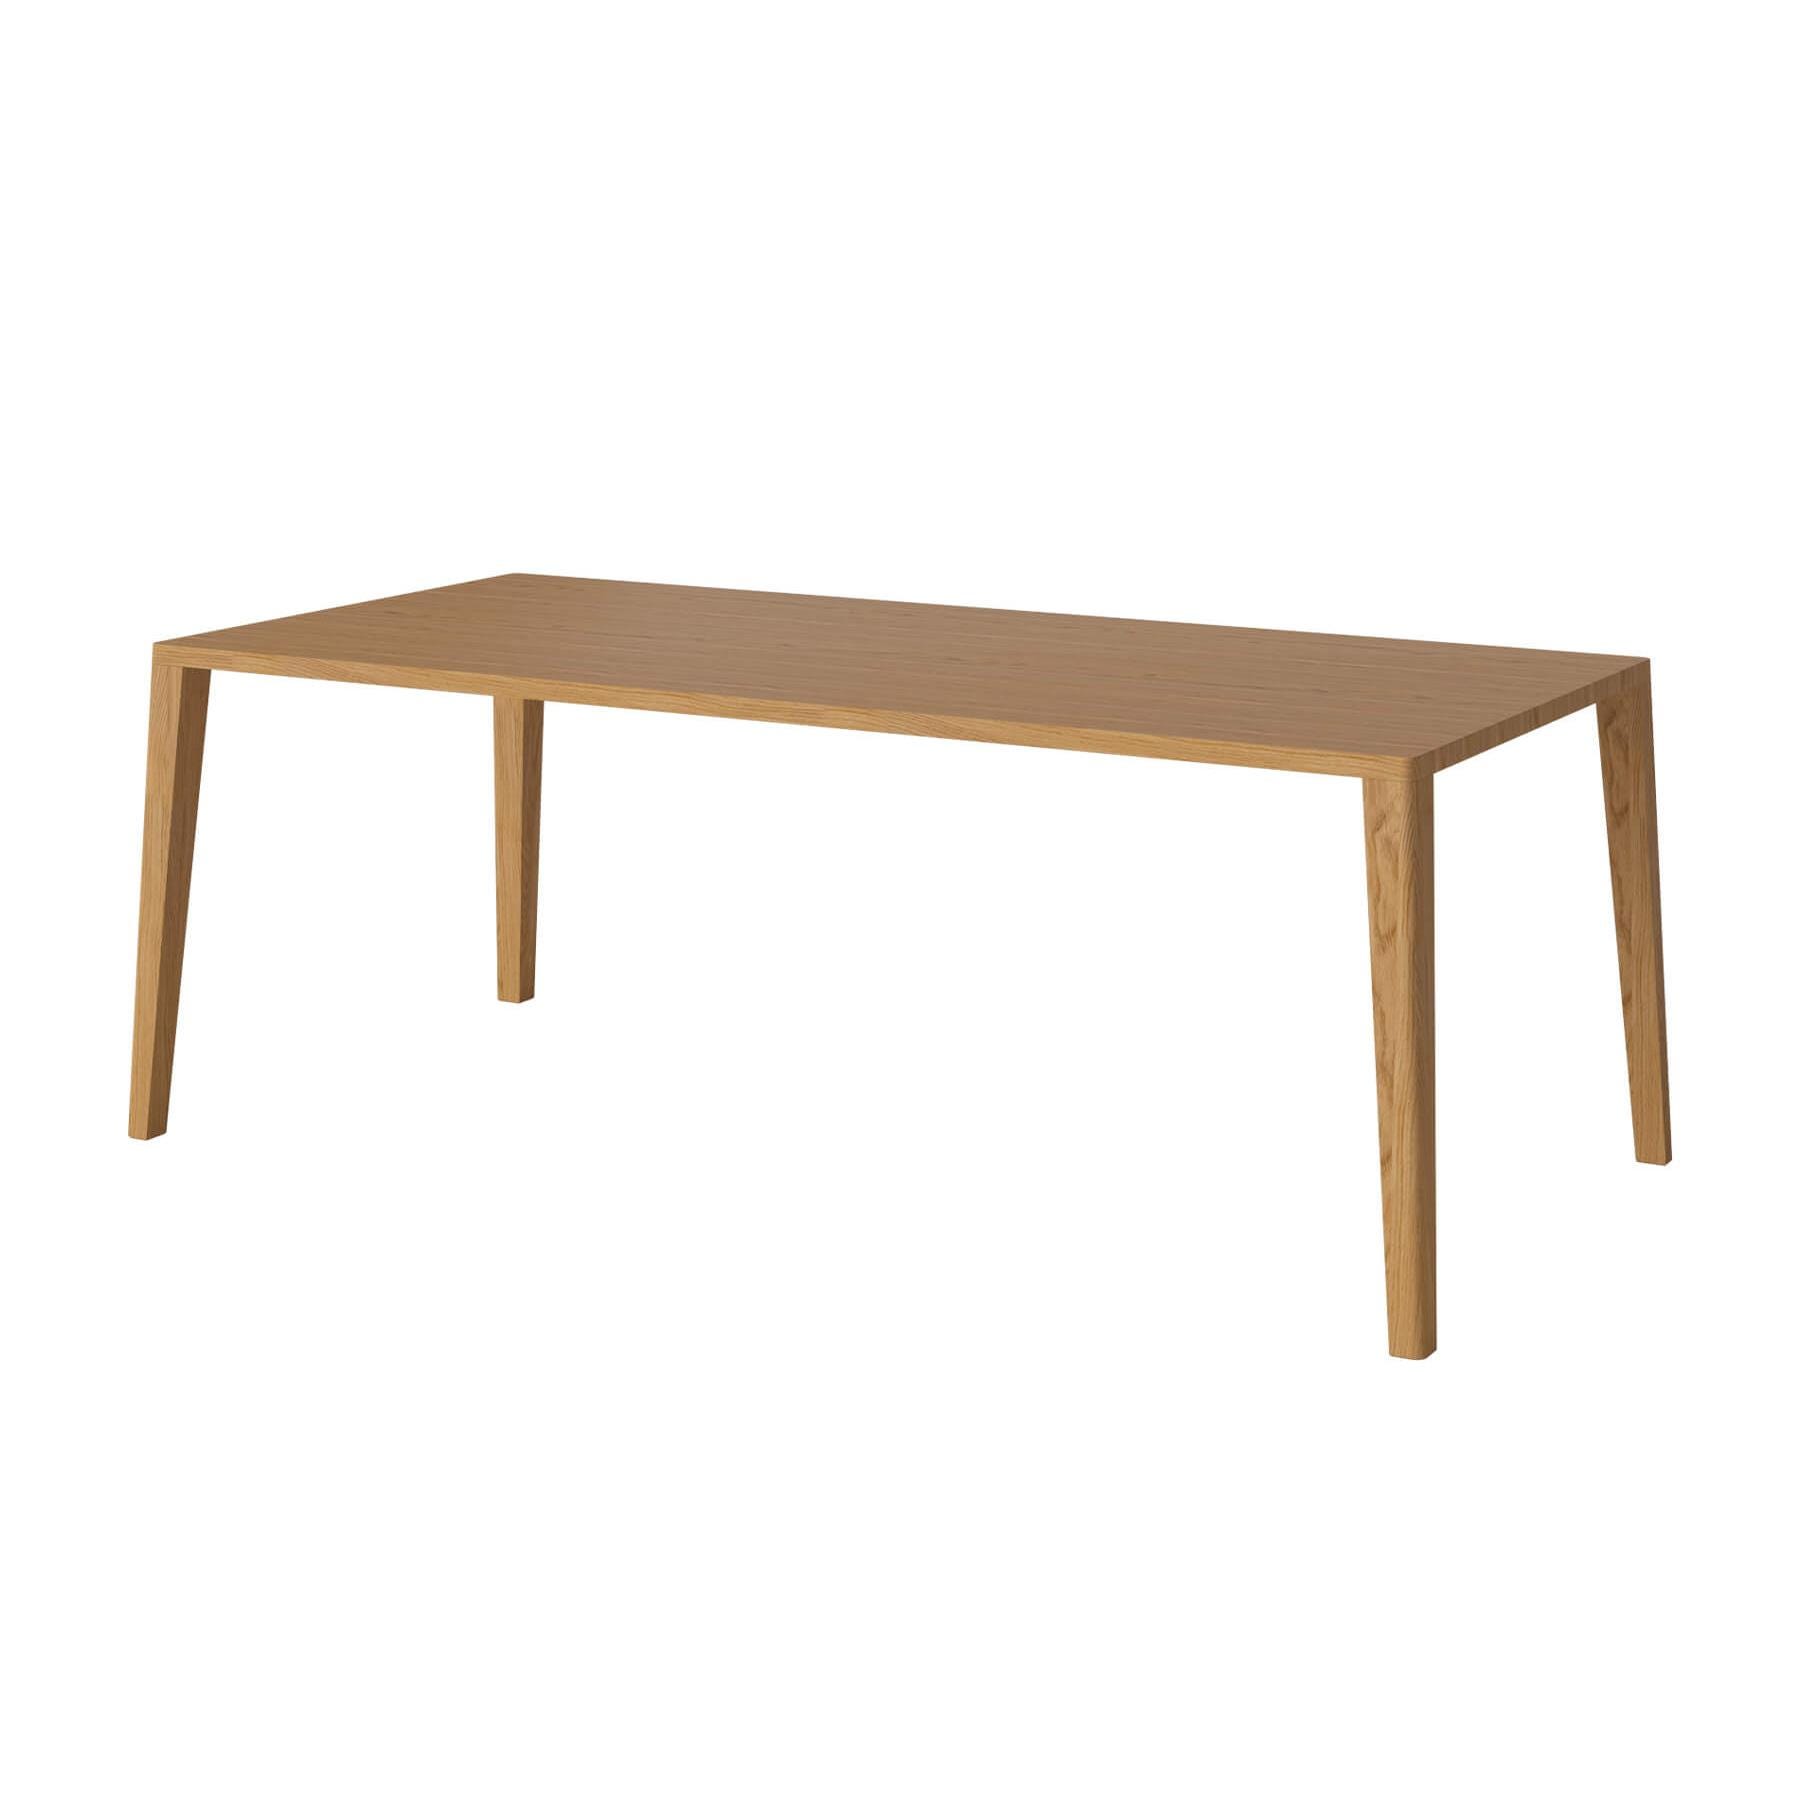 Bolia Graceful Dining Table 200 X 95cm Oiled Legs Without Extension Leaves Light Wood Designer Furniture From Holloways Of Ludlow